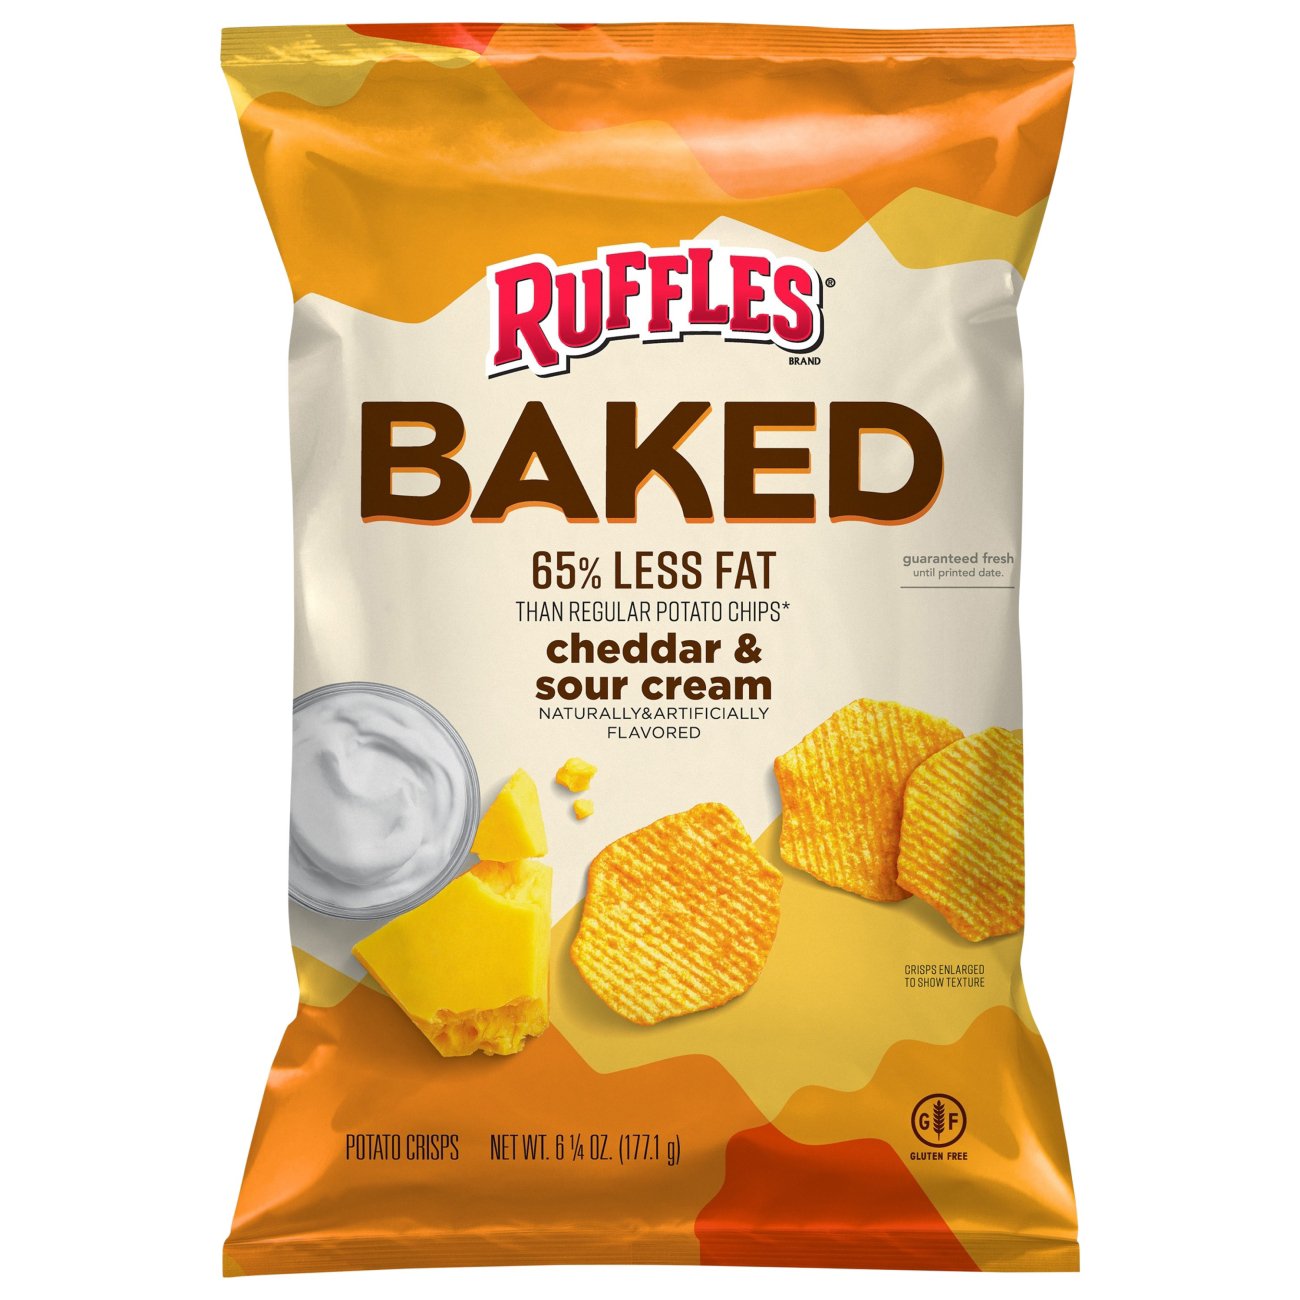 Ruffles Oven Baked Cheddar Sour Cream